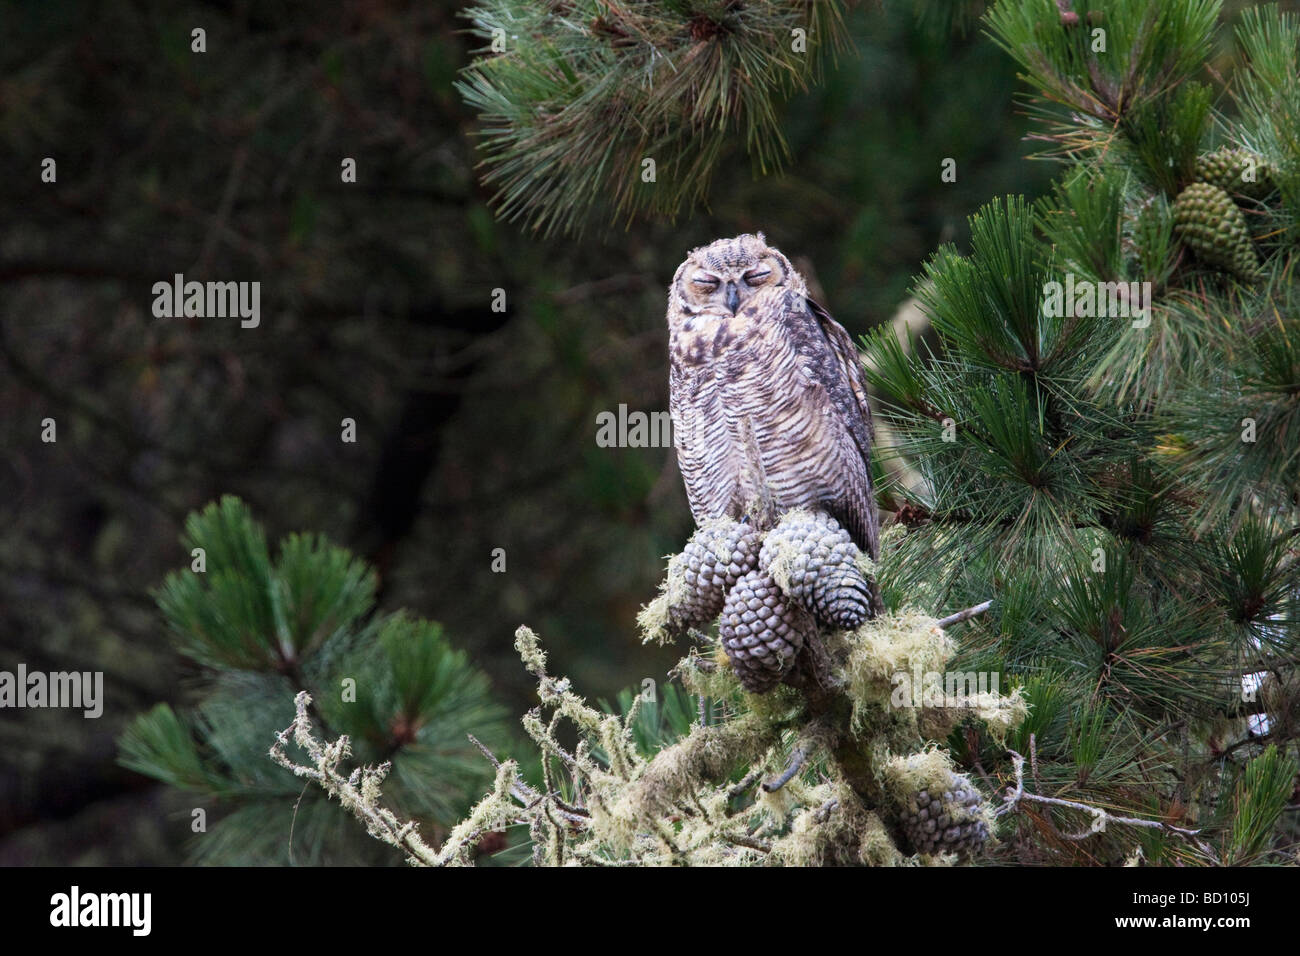 Young female Great Horned Owl sleeping on a branch, Estero Trail, Point Reyes National Seashore, California, USA Stock Photo